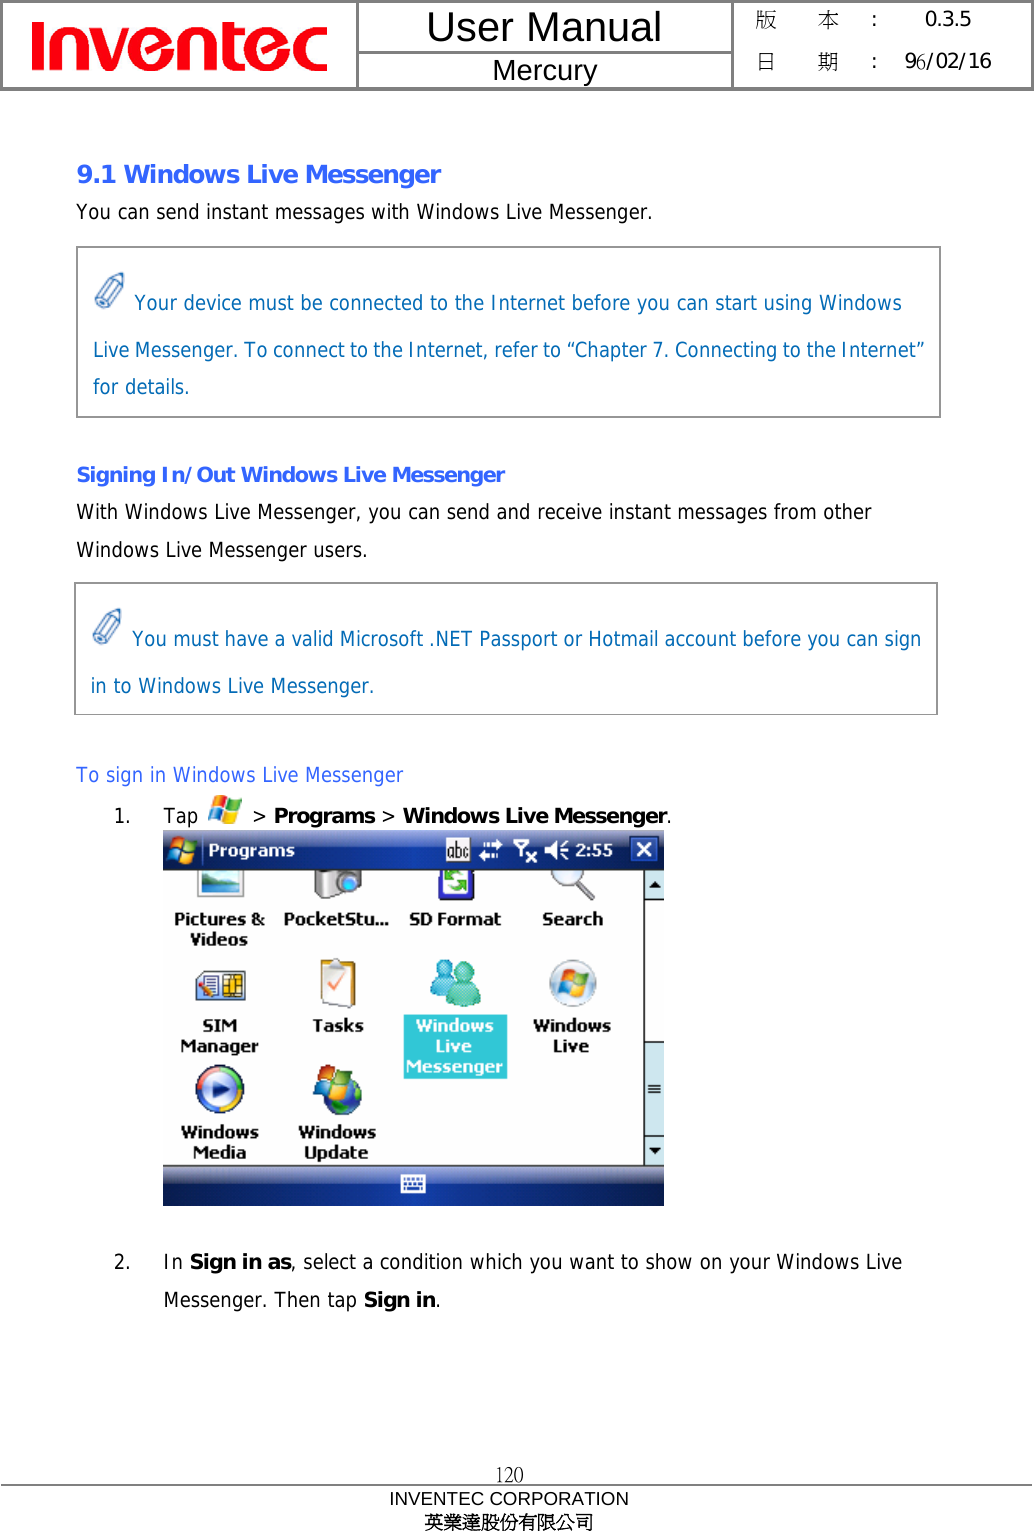 User Manual  Mercury 版    本 :  0.3.5 日    期 : 96/02/16  120 INVENTEC CORPORATION 英業達股份有限公司   9.1 Windows Live Messenger You can send instant messages with Windows Live Messenger.       Signing In/Out Windows Live Messenger With Windows Live Messenger, you can send and receive instant messages from other Windows Live Messenger users.      To sign in Windows Live Messenger 1. Tap   &gt; Programs &gt; Windows Live Messenger.   2. In Sign in as, select a condition which you want to show on your Windows Live Messenger. Then tap Sign in.  Your device must be connected to the Internet before you can start using Windows Live Messenger. To connect to the Internet, refer to “Chapter 7. Connecting to the Internet” for details.  You must have a valid Microsoft .NET Passport or Hotmail account before you can sign in to Windows Live Messenger. 